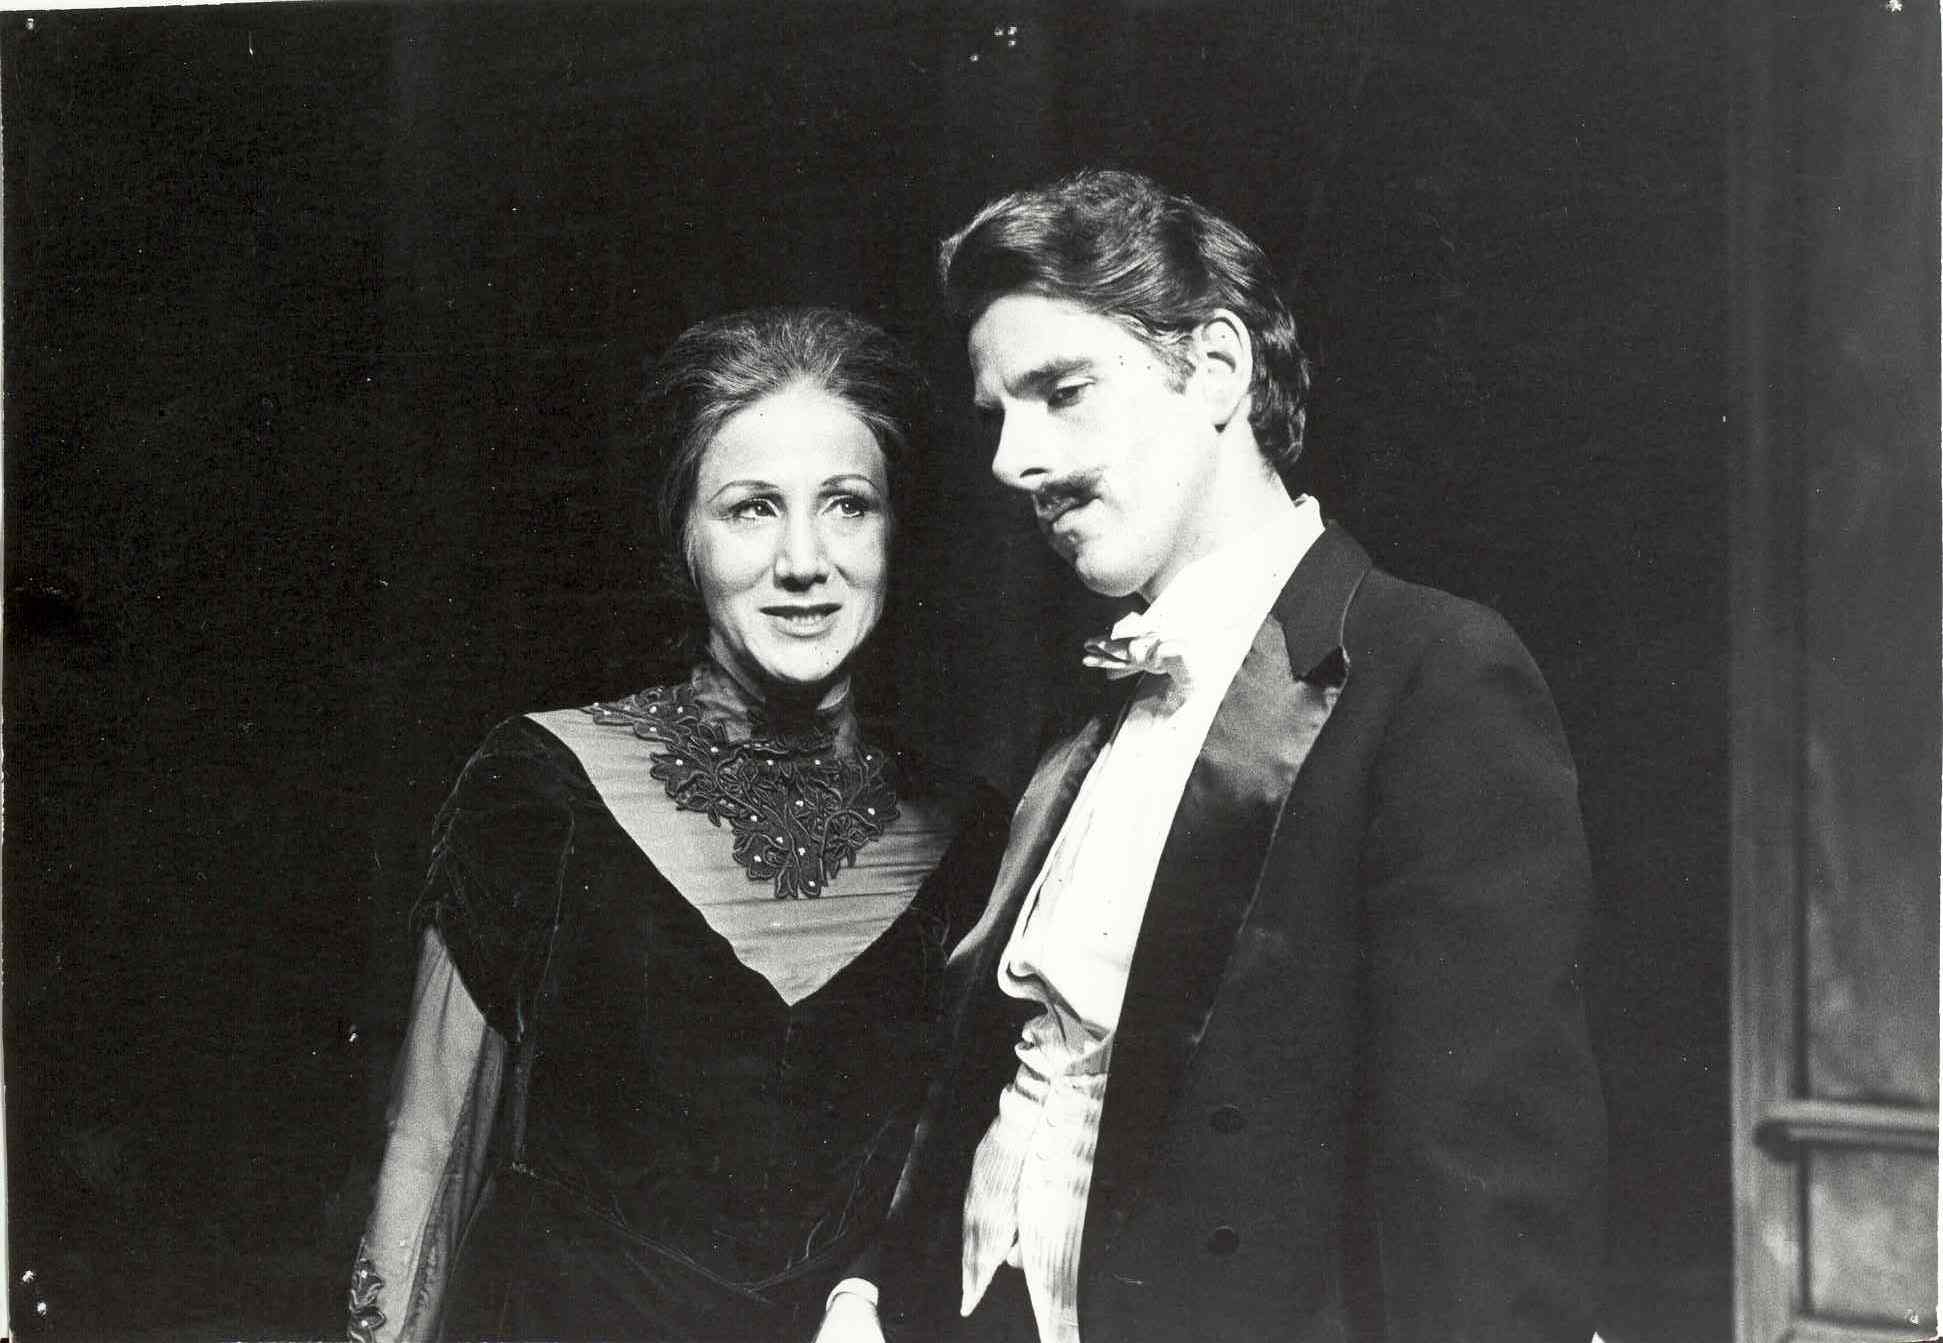 WTF's 1975 production of ENEMIES, directed by Nikos Psacharopoulos; Olympia Dukakis and Peter Evans; photo credit CG Wolfson